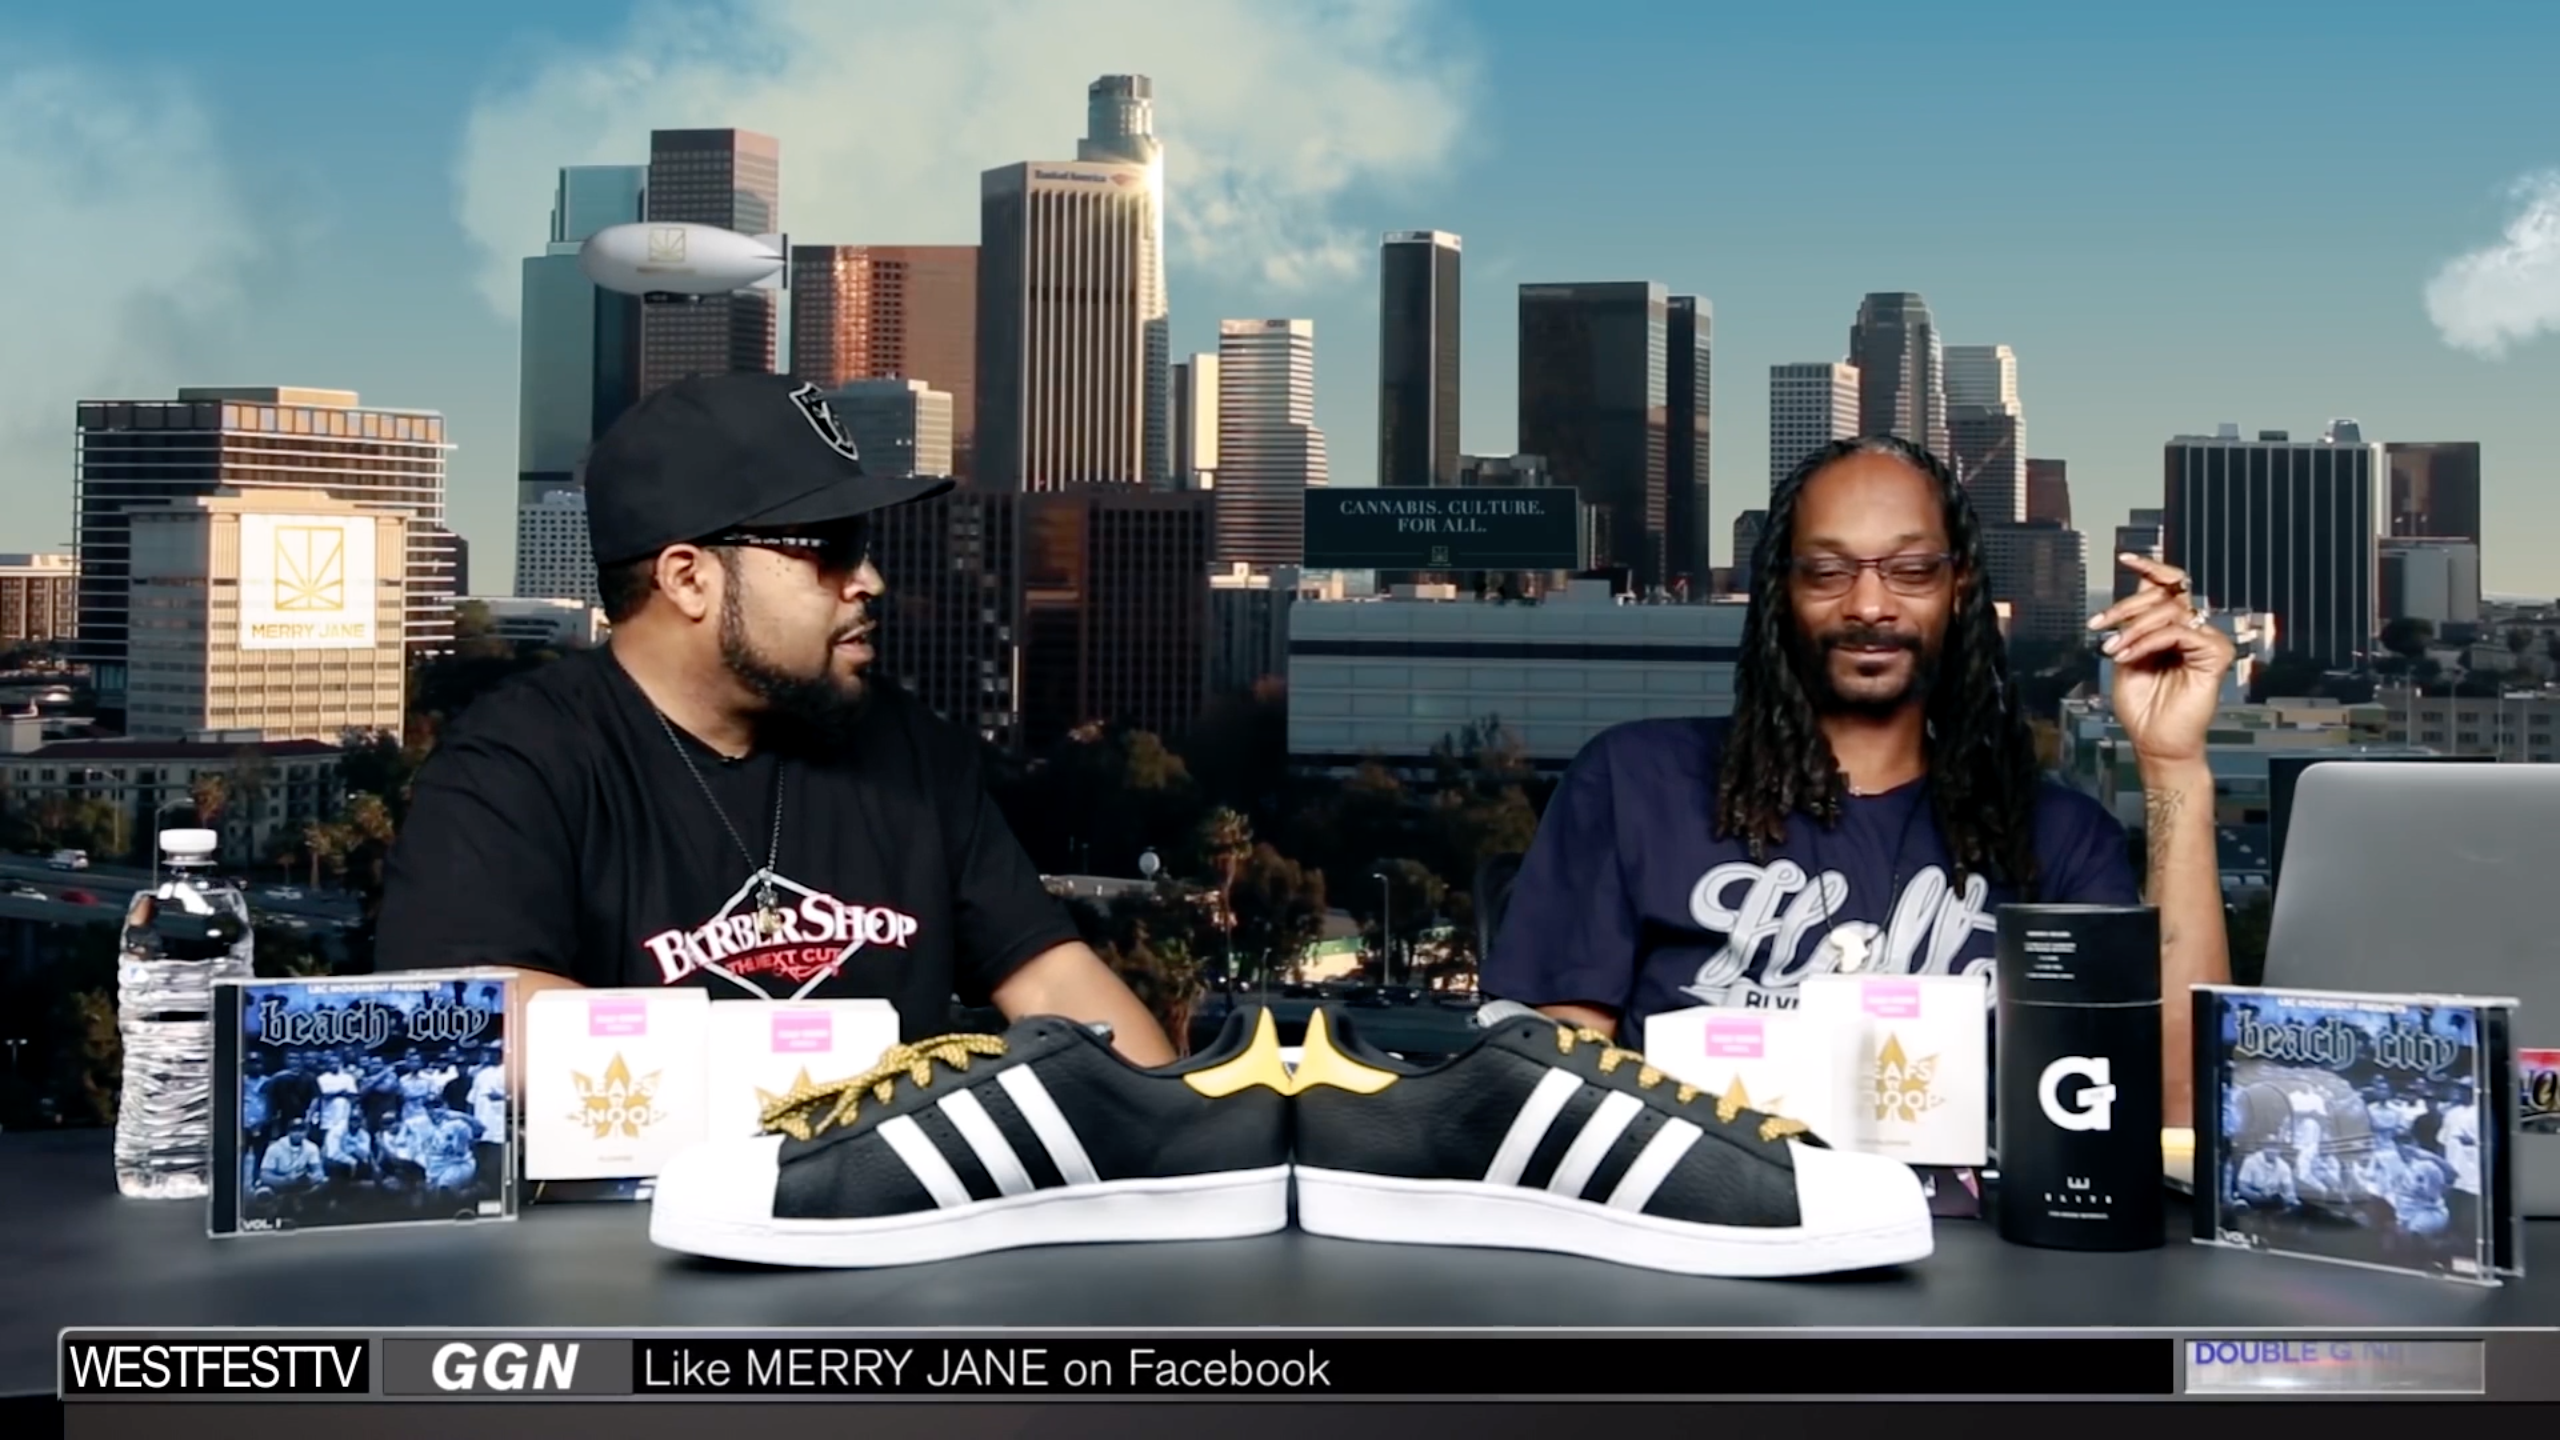 Snoop Talks Shop with Hip Hop Heavyweights on a New “Best of GGN”